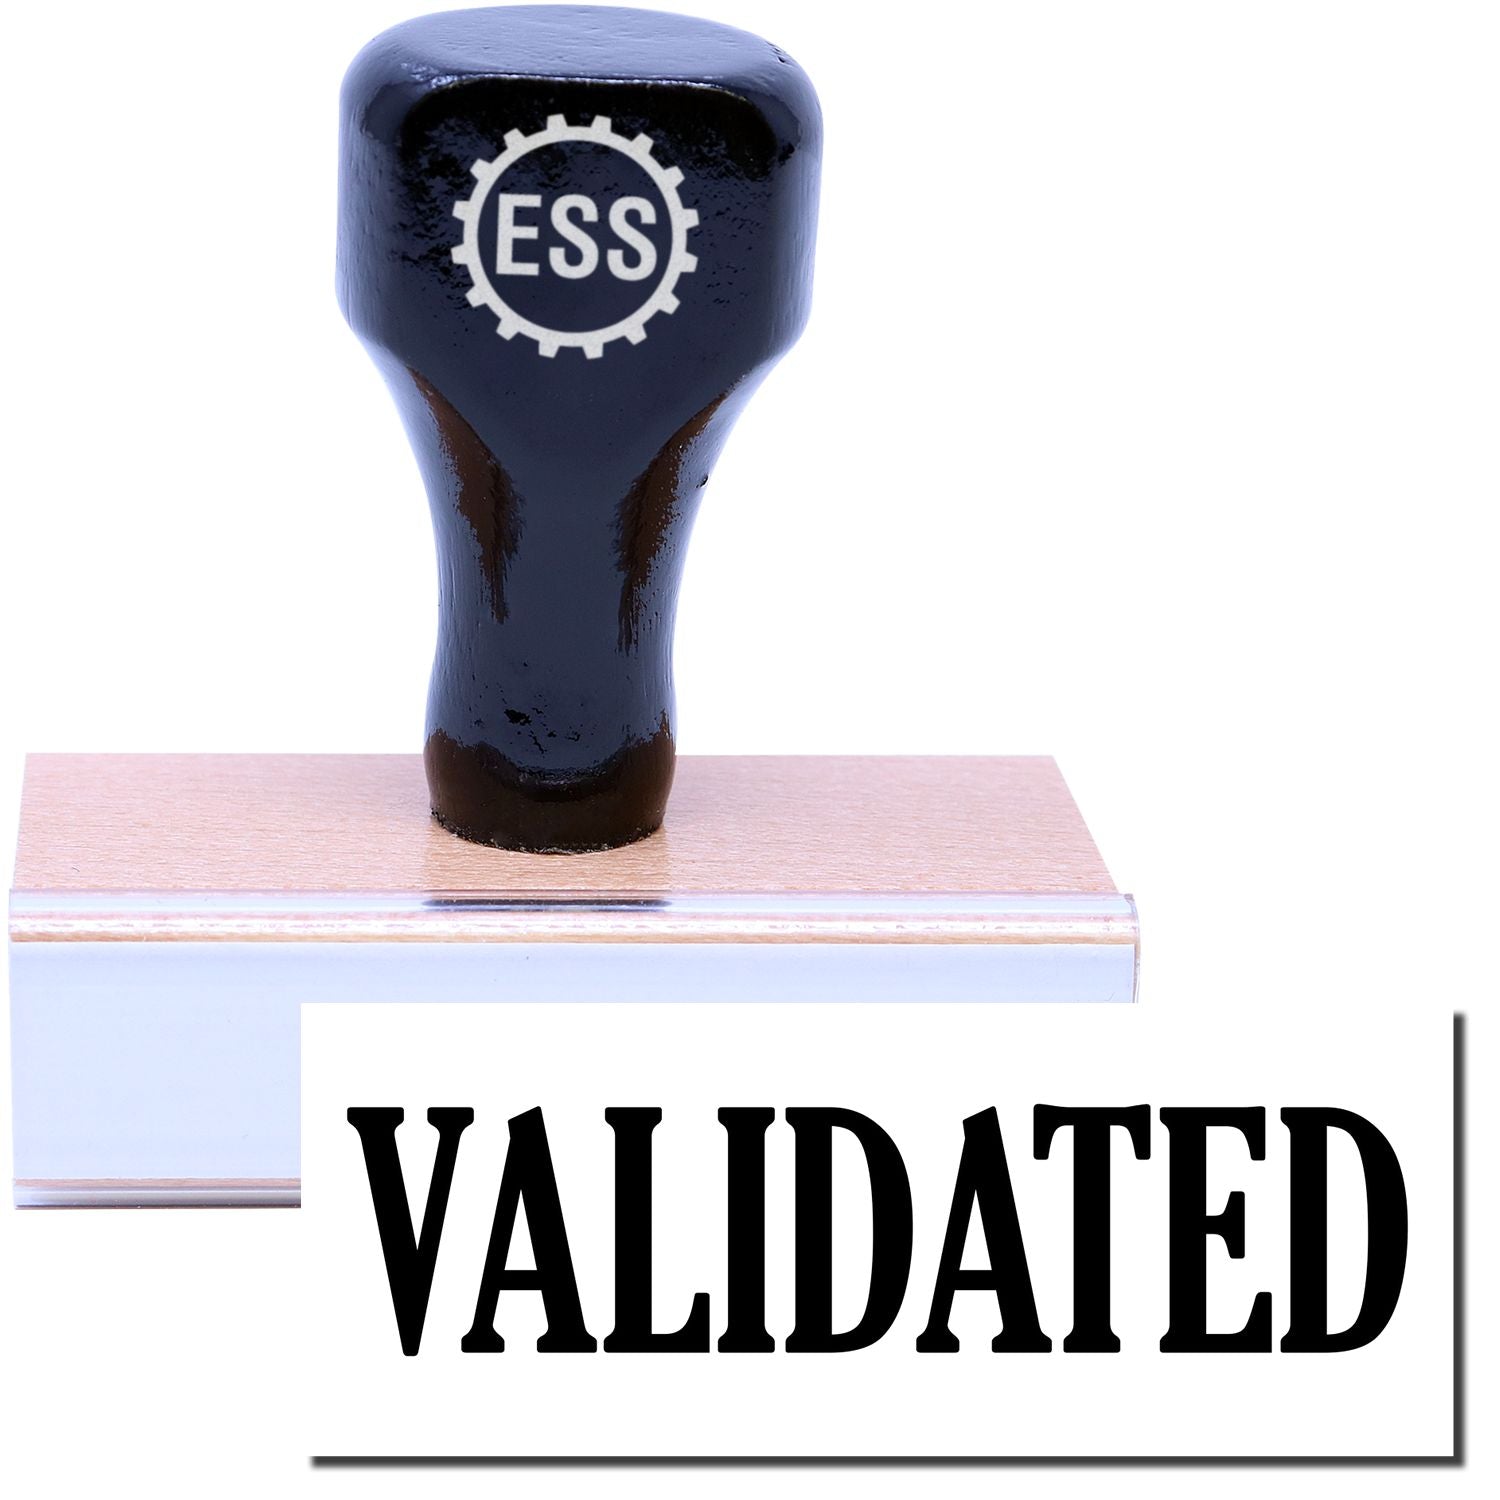 A stock office rubber stamp with a stamped image showing how the text "VALIDATED" in a large font is displayed after stamping.